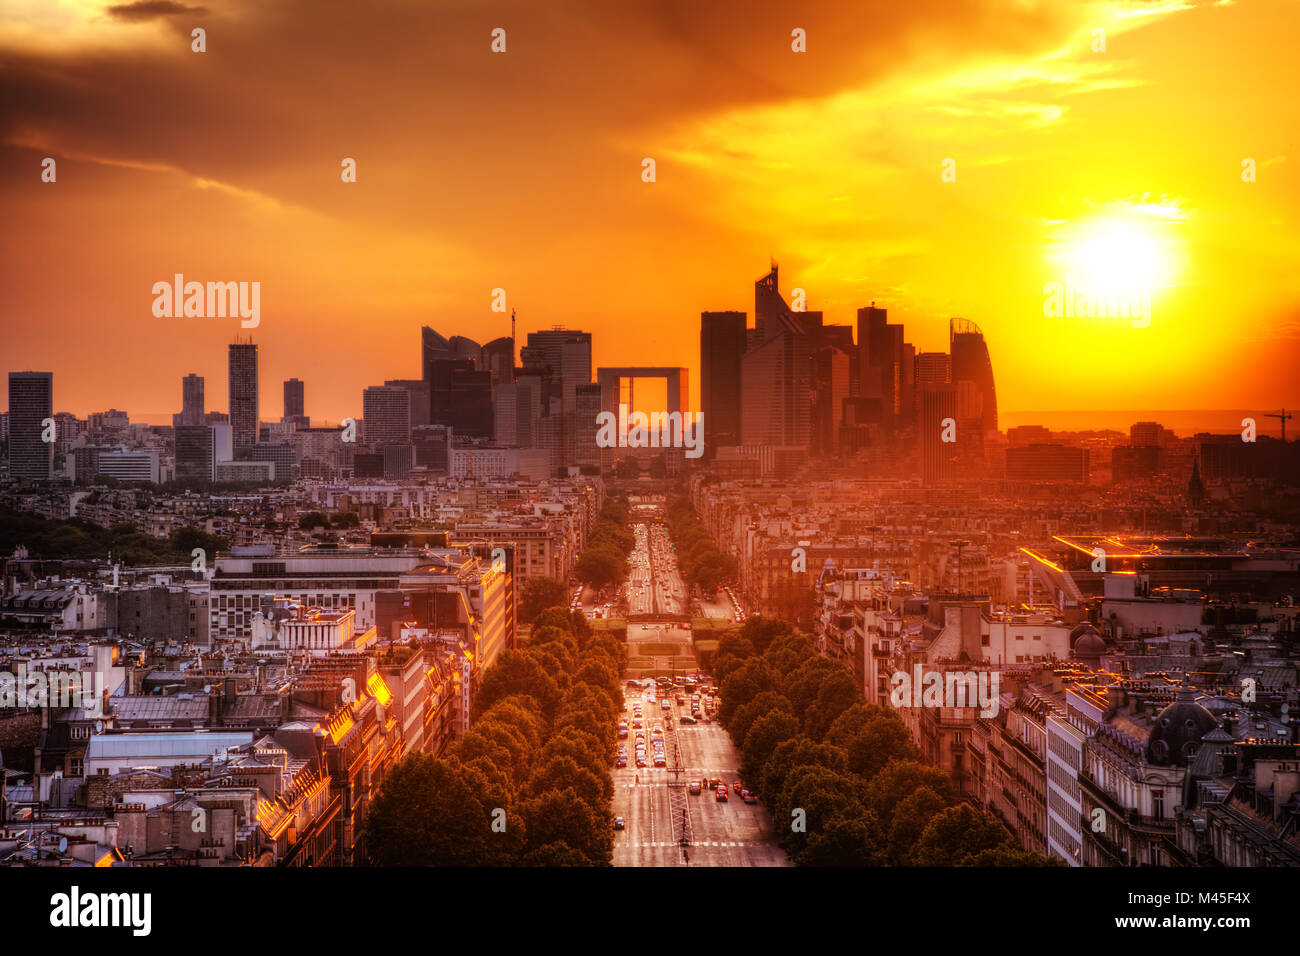 La Defense and Champs-Elysees at sunset in Paris, France. Stock Photo